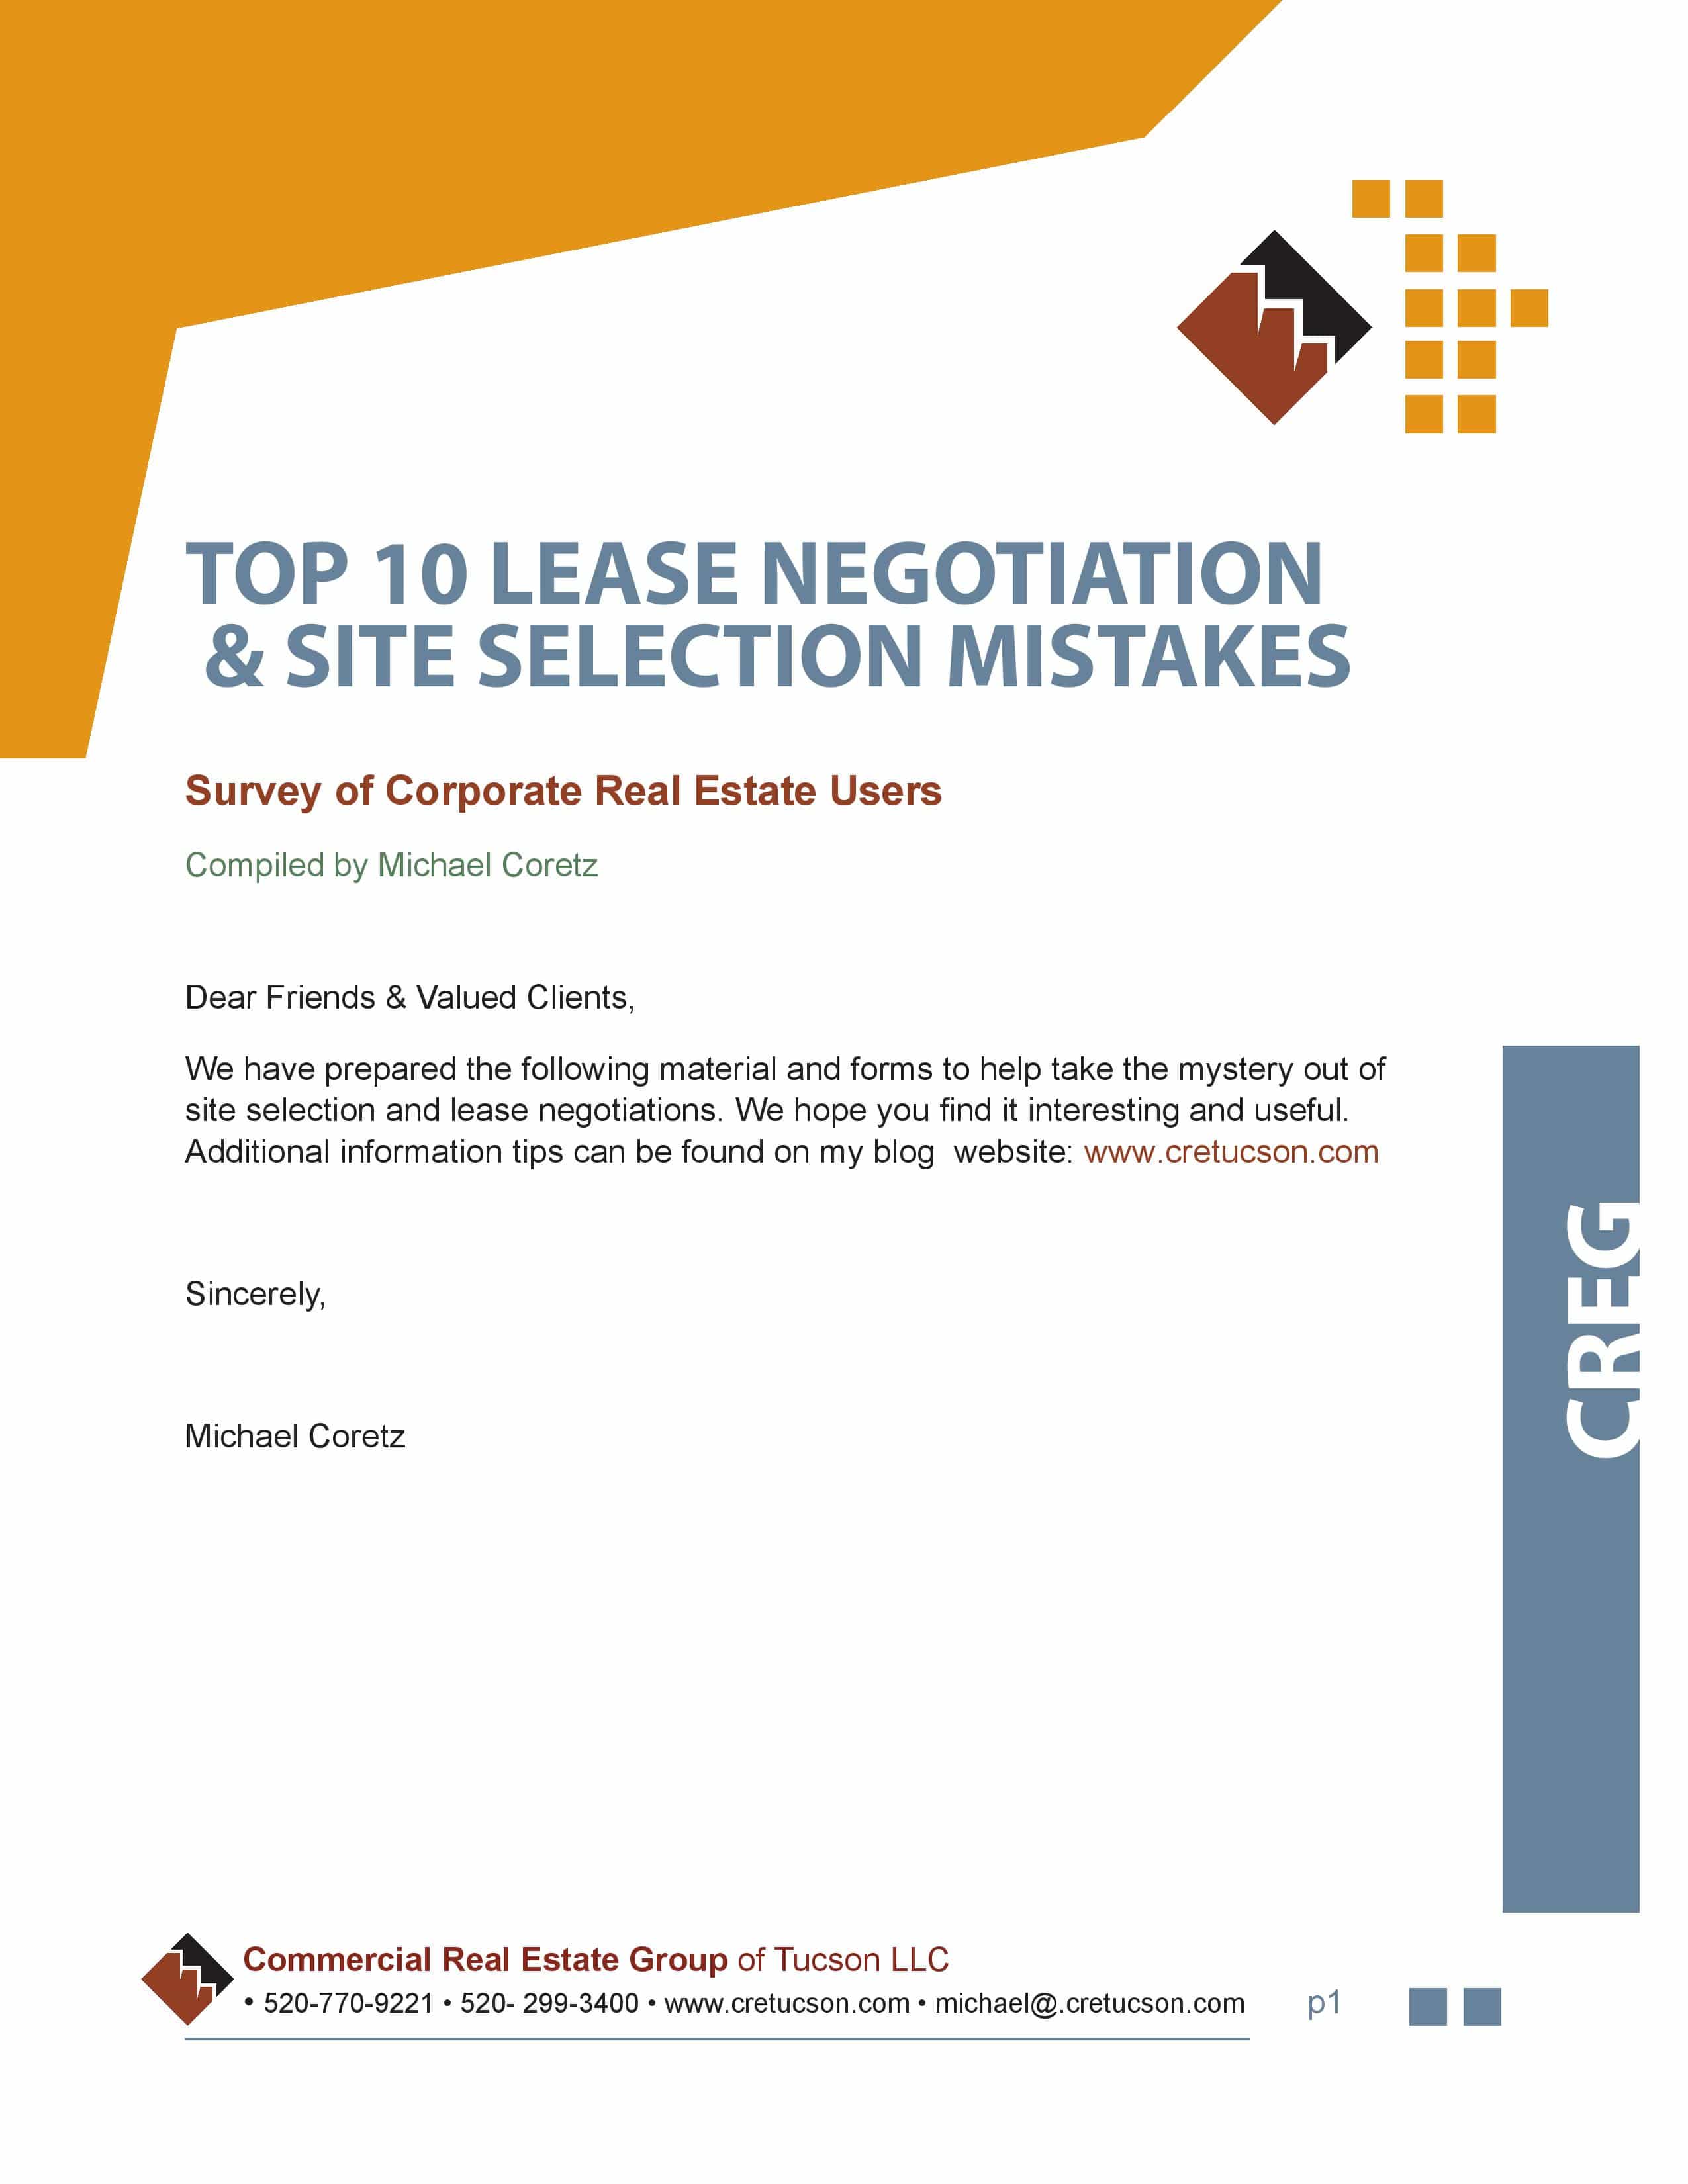 Top 10 Lease Negotiaion and Site Selection Mistakes